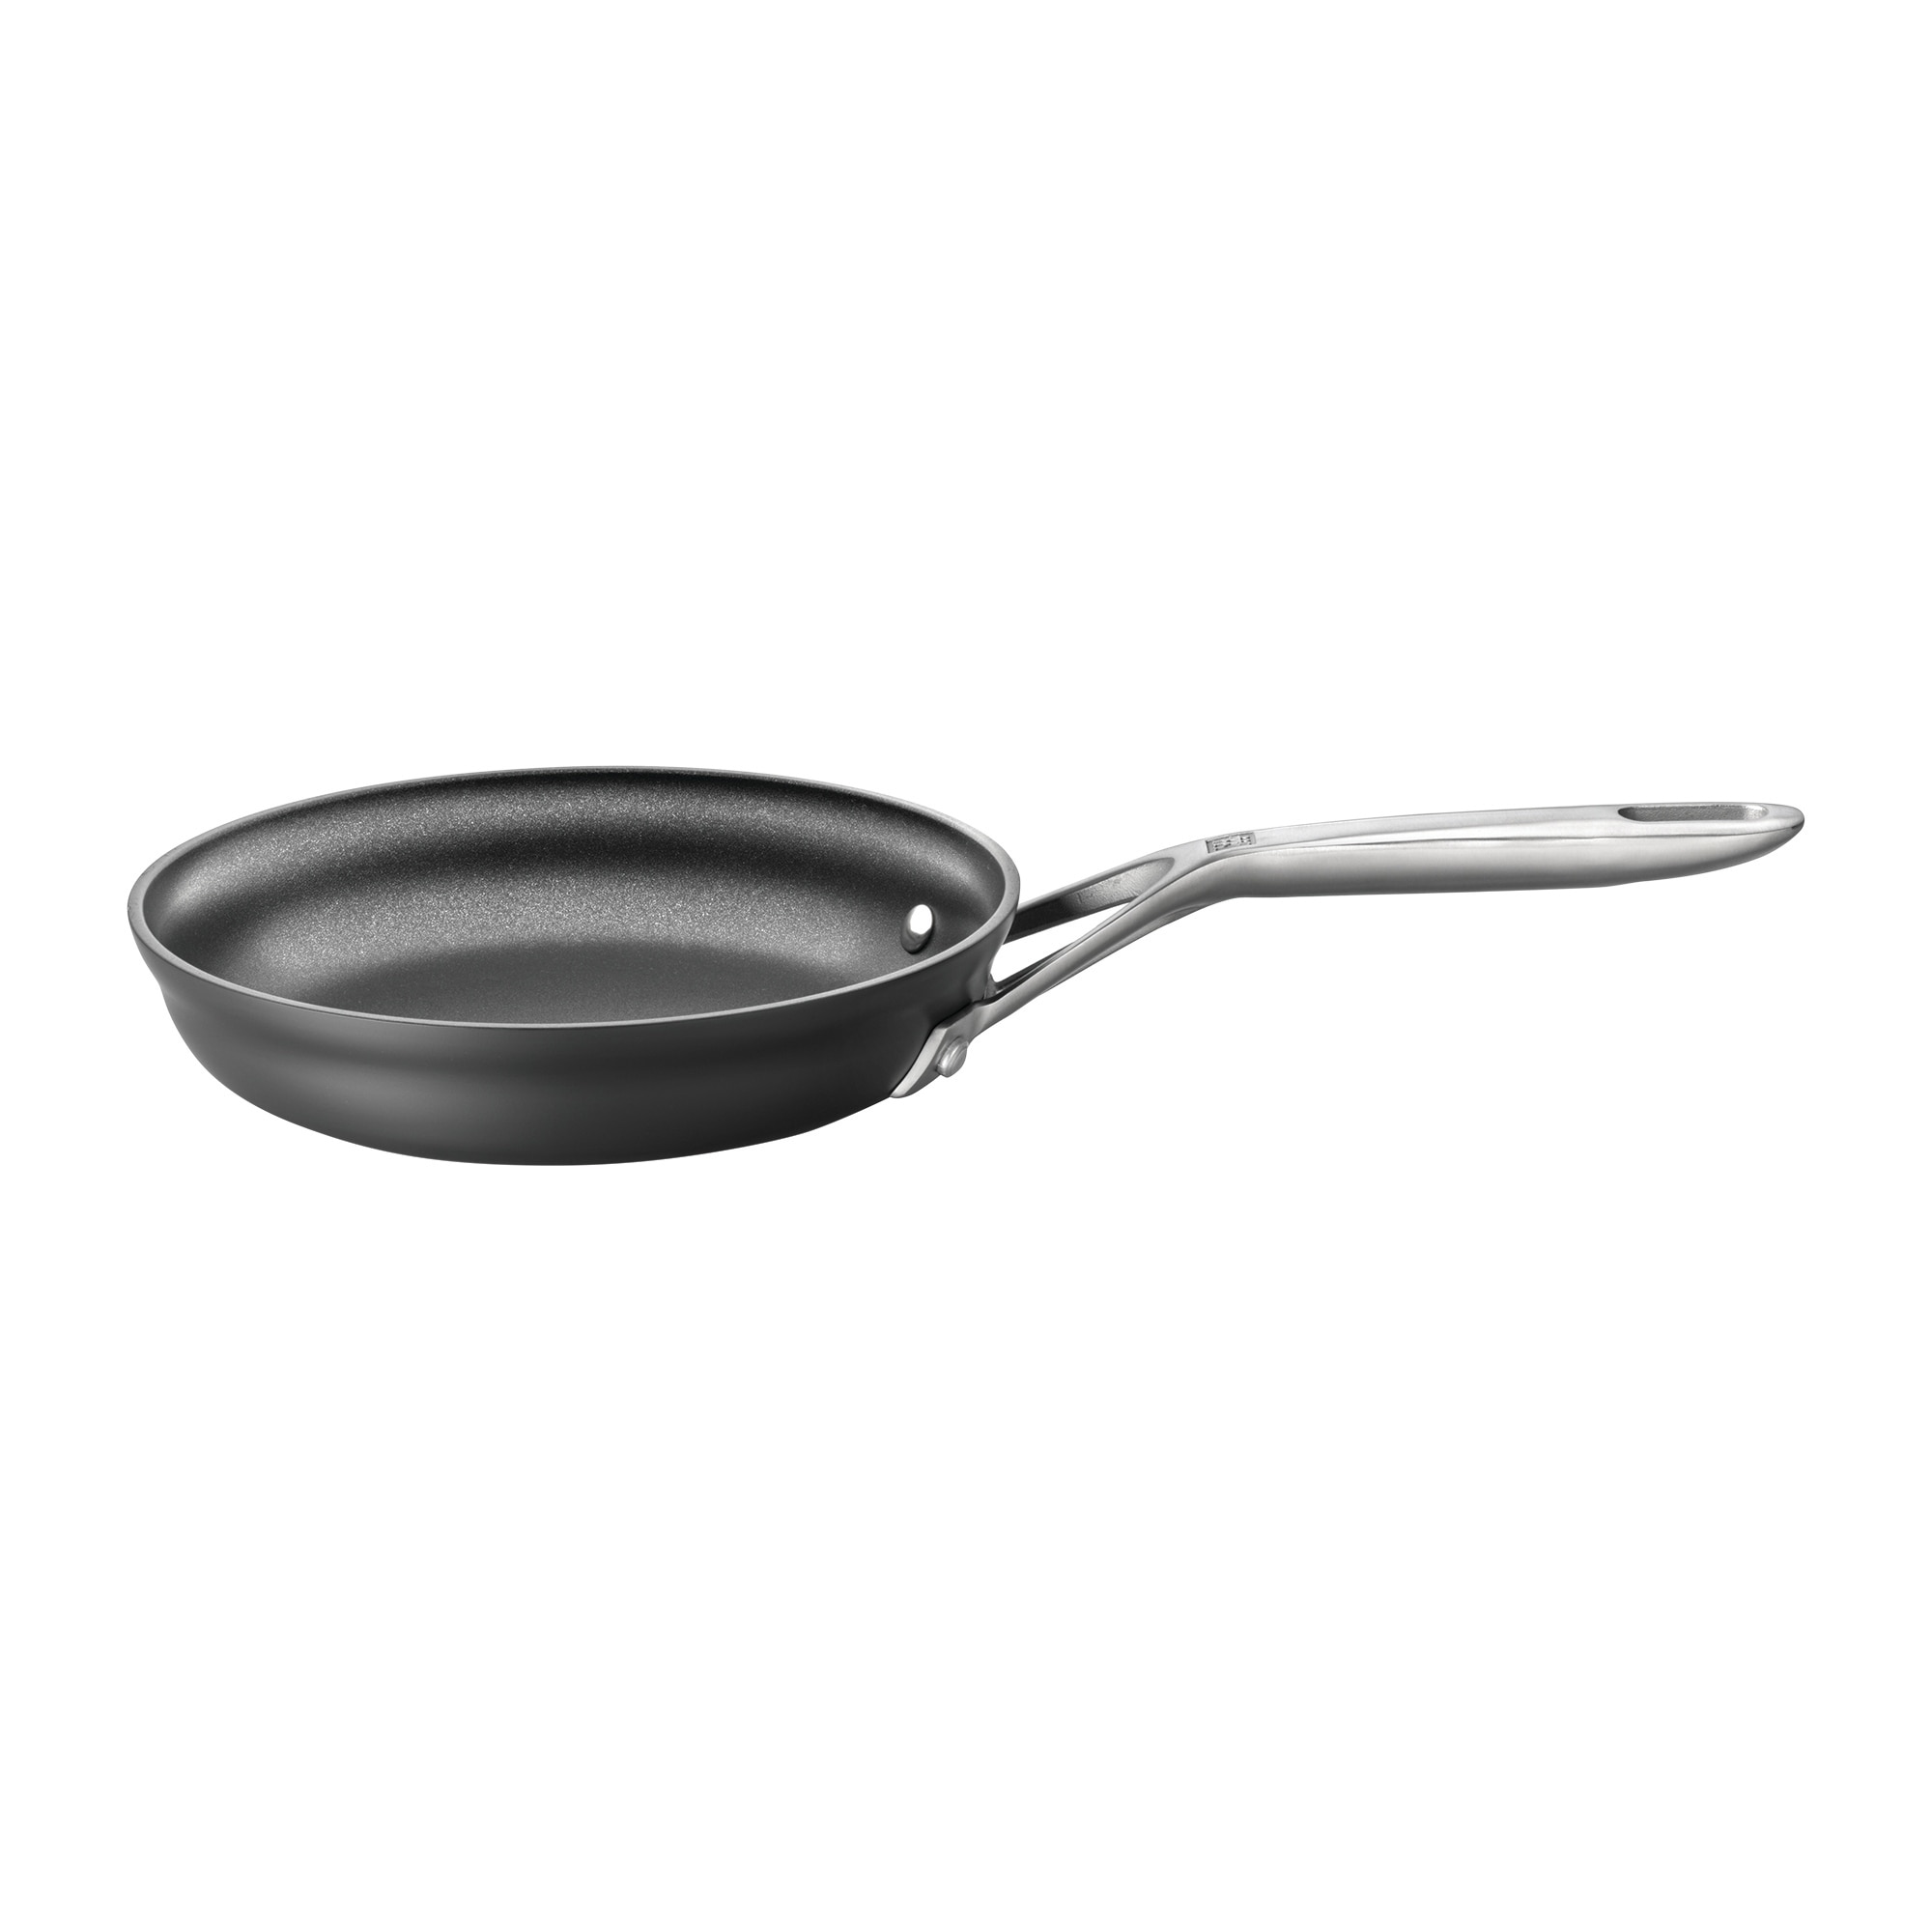 https://ak1.ostkcdn.com/images/products/is/images/direct/427d839427a6d2ae473970c1efc3c5691f8662ae/ZWILLING-Motion-Hard-Anodized-Aluminum-Nonstick-Fry-Pan.jpg